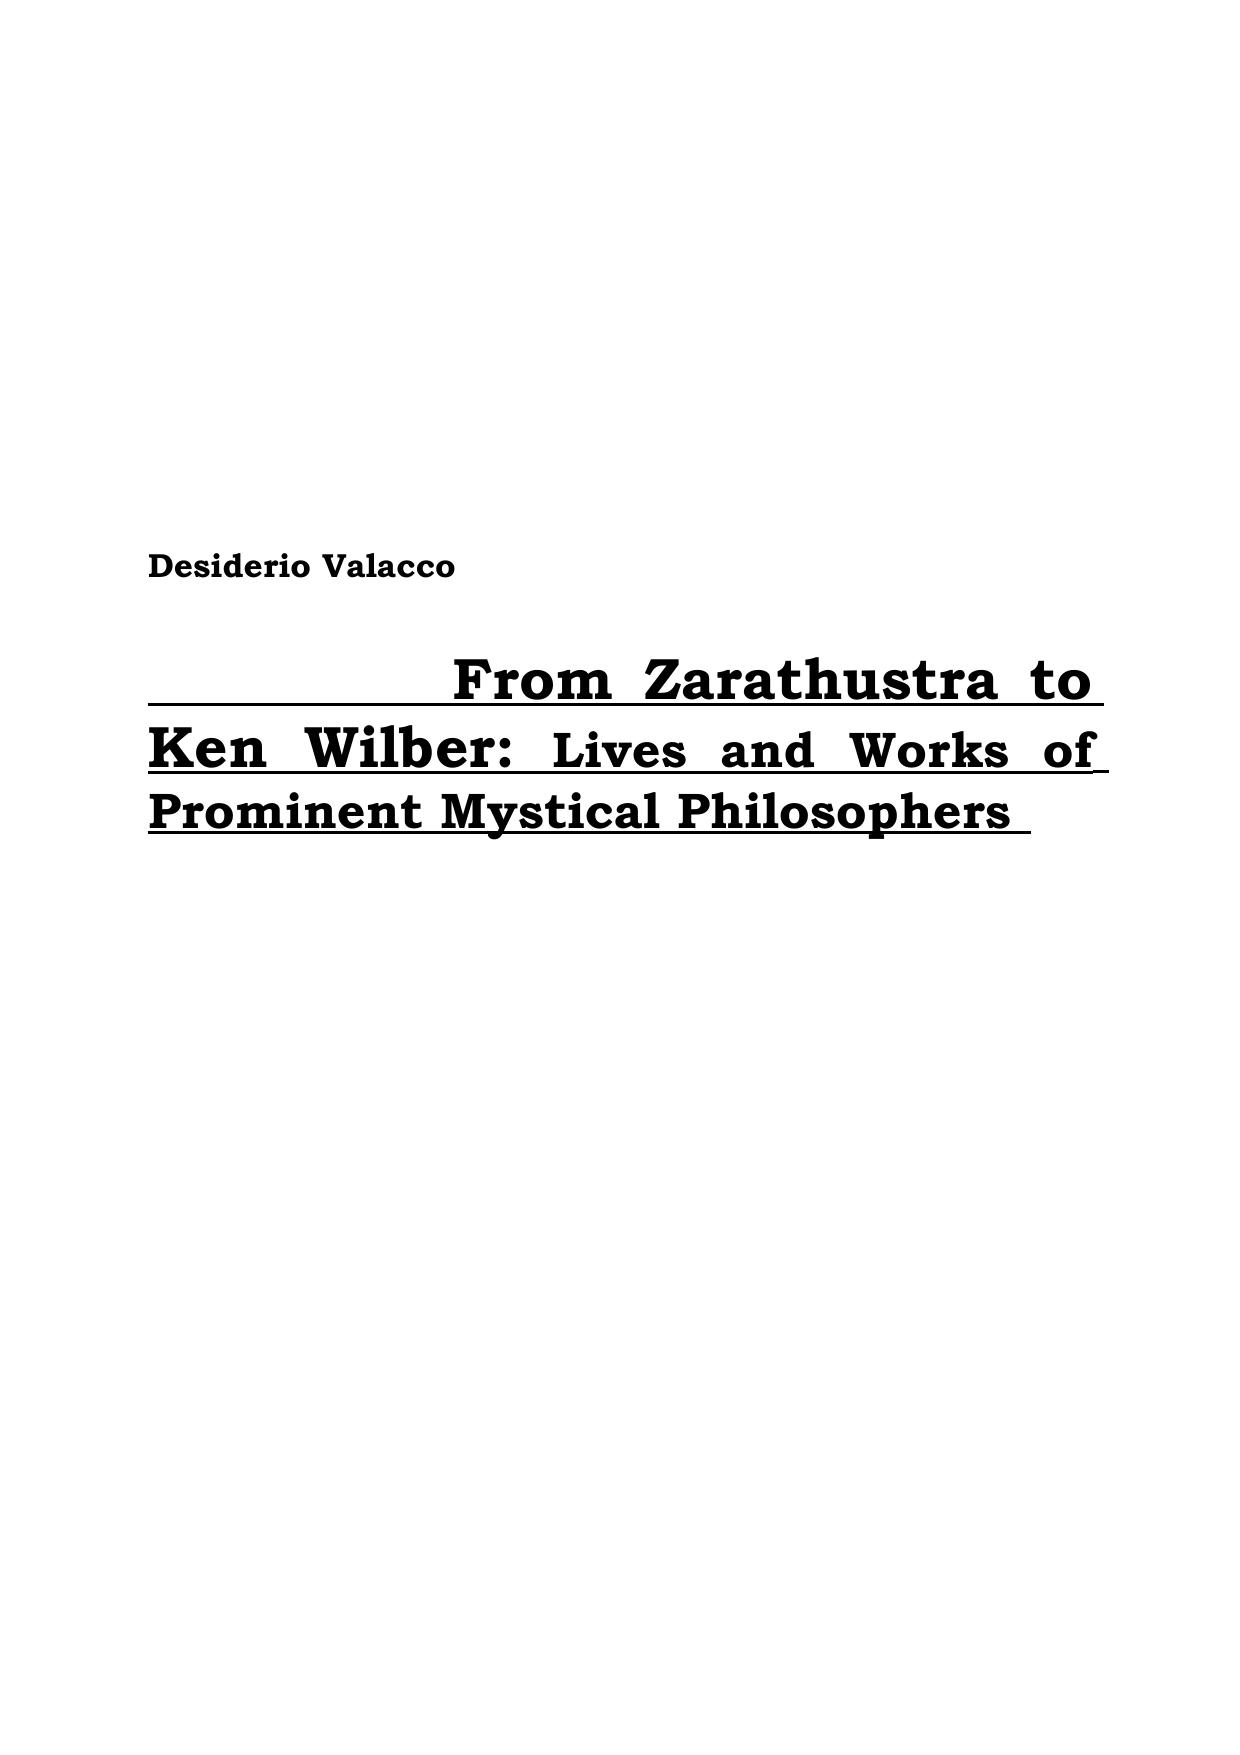 From Zarathustra to Ken Wilber - Lives and Worksvof Prominent Mystical Philosophers